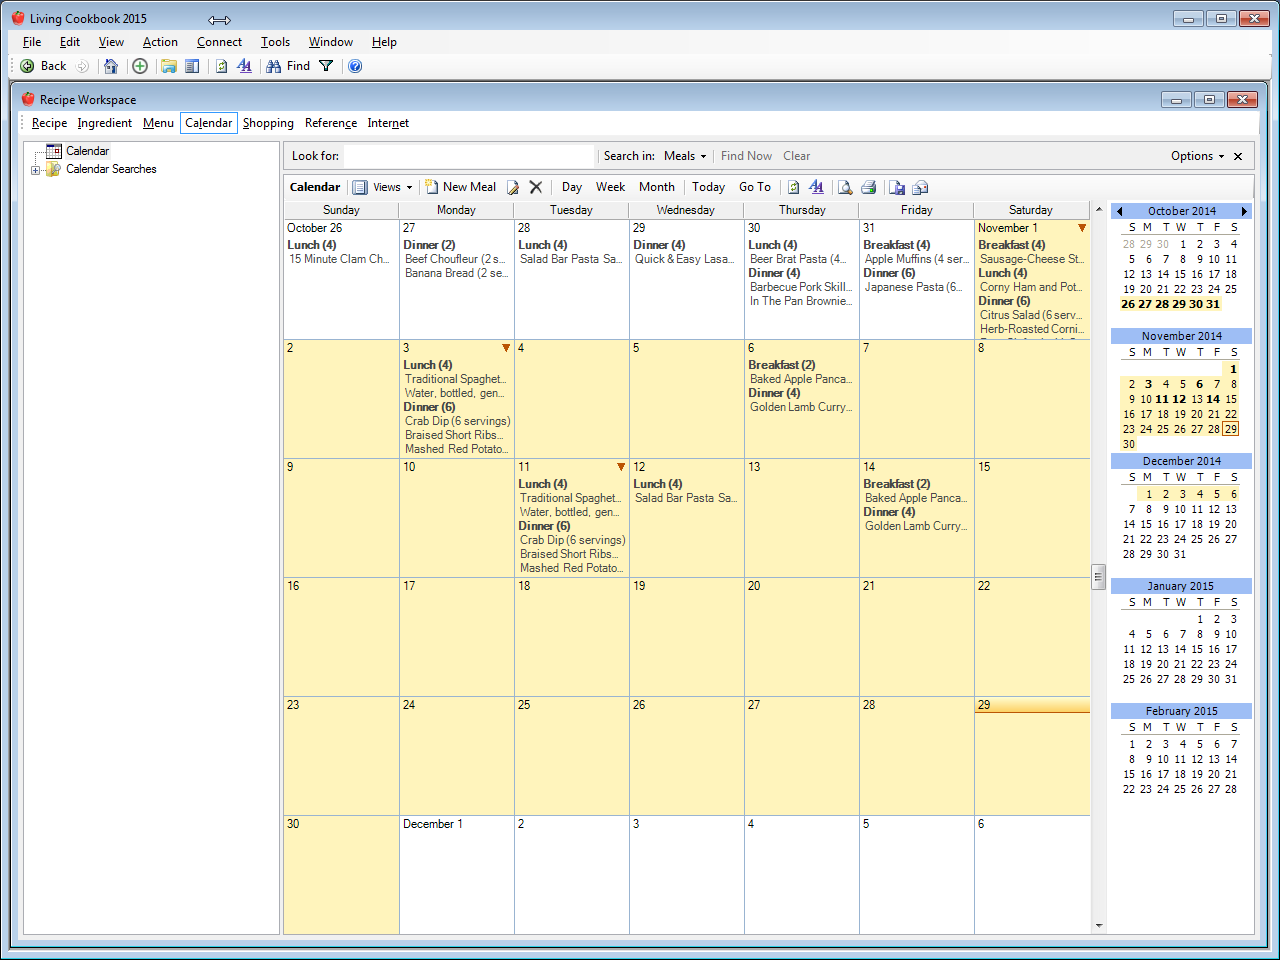 View the calendar in month mode